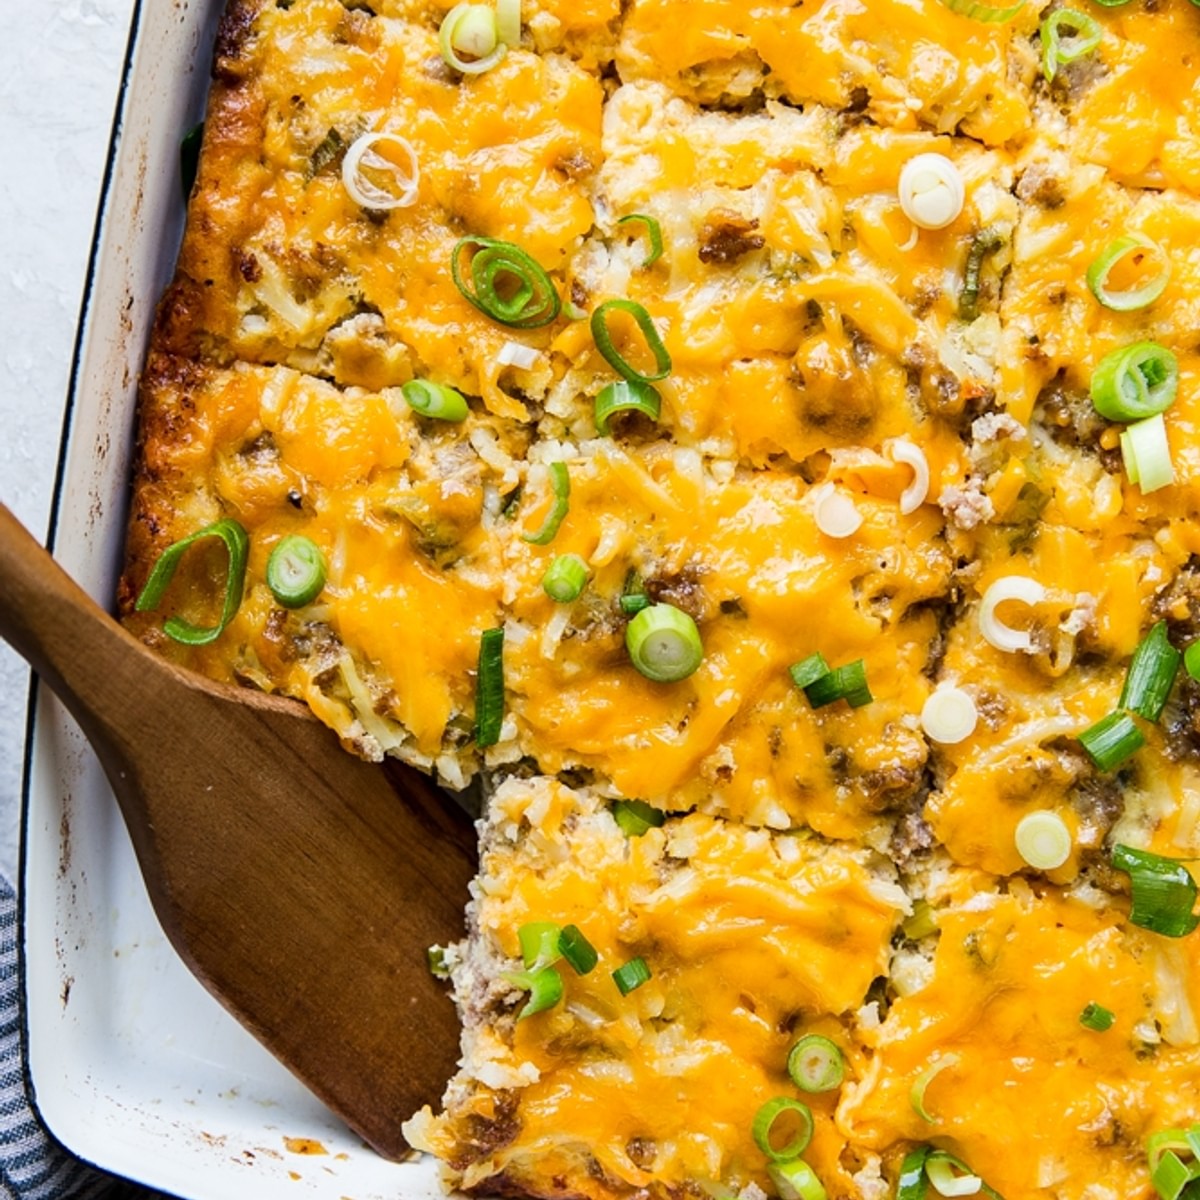 Sausage Breakfast Casserole with hash browns and green onions in a baking dish